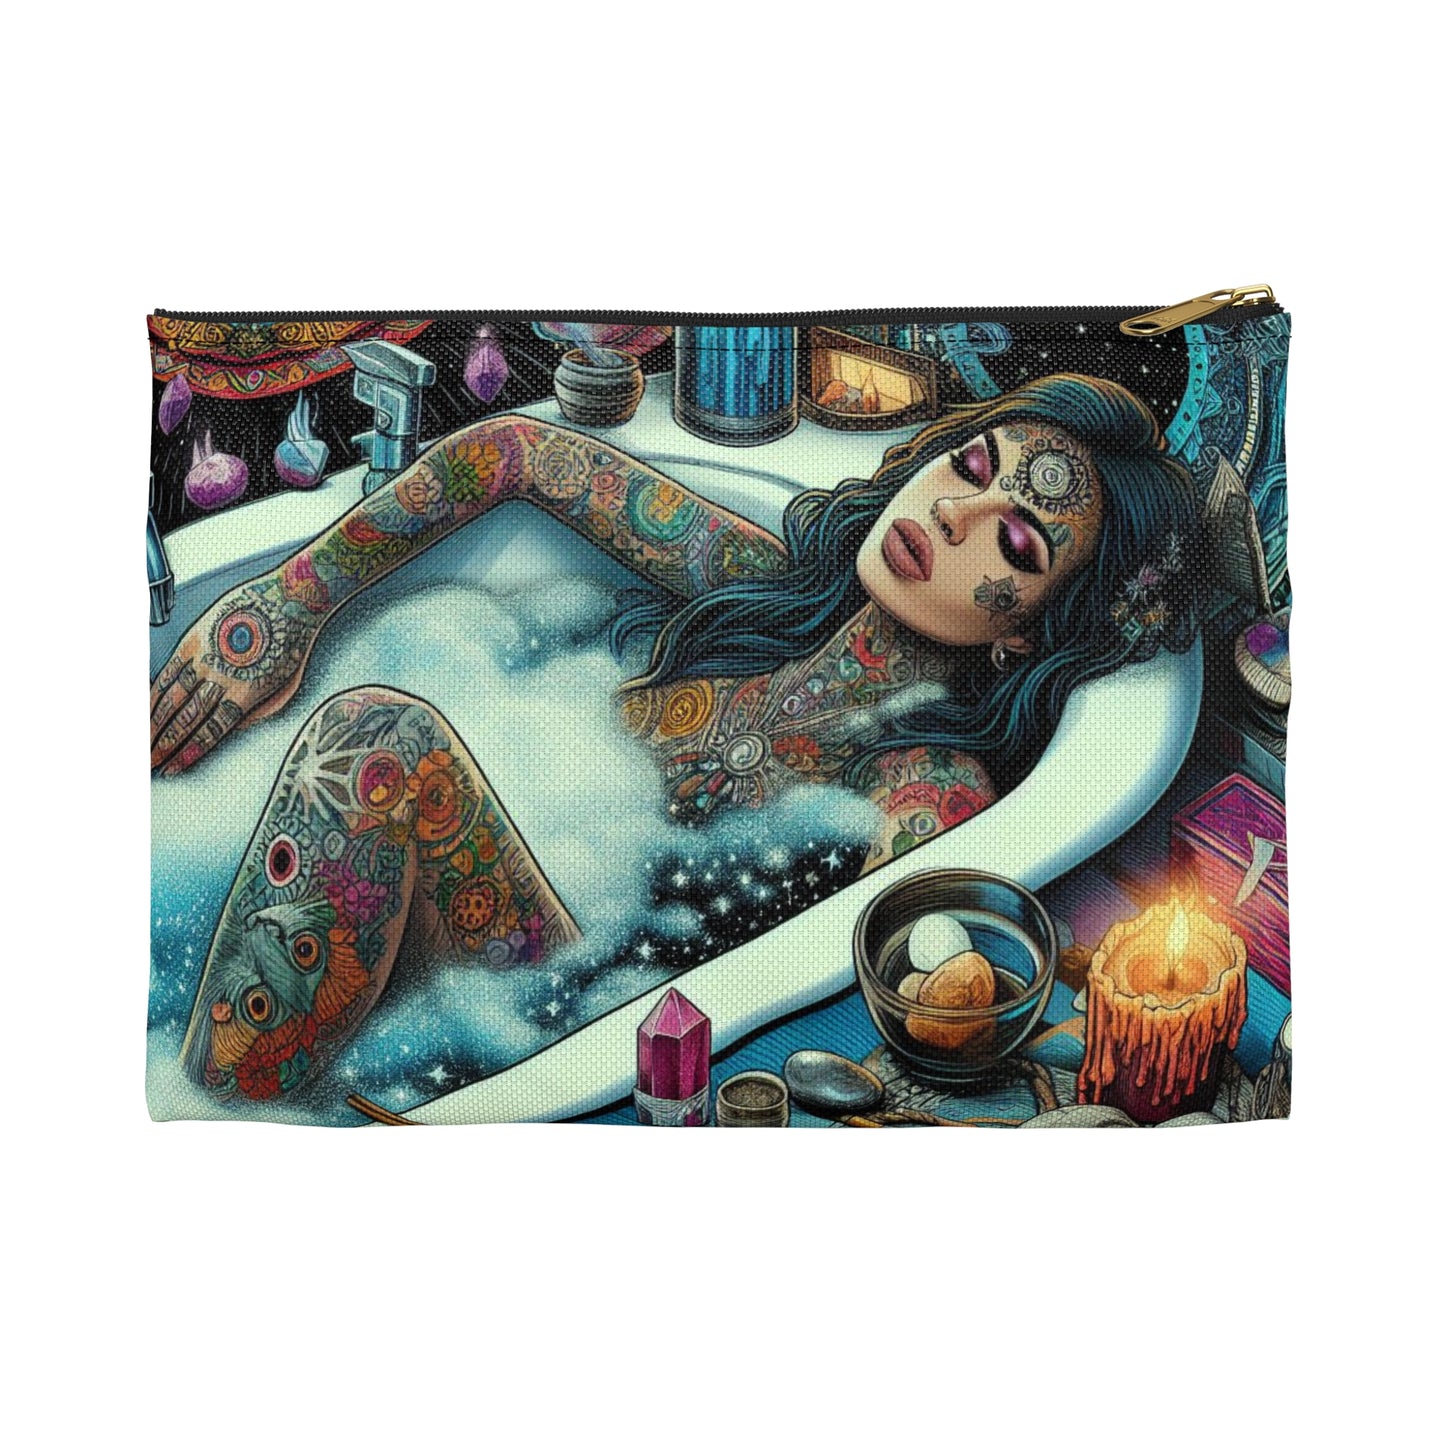 COSMIC BATH Reset & Recharge Accessory Pouch: Toiletries Bag, On-the-go Items, Tarot Deck, Crystals Bag